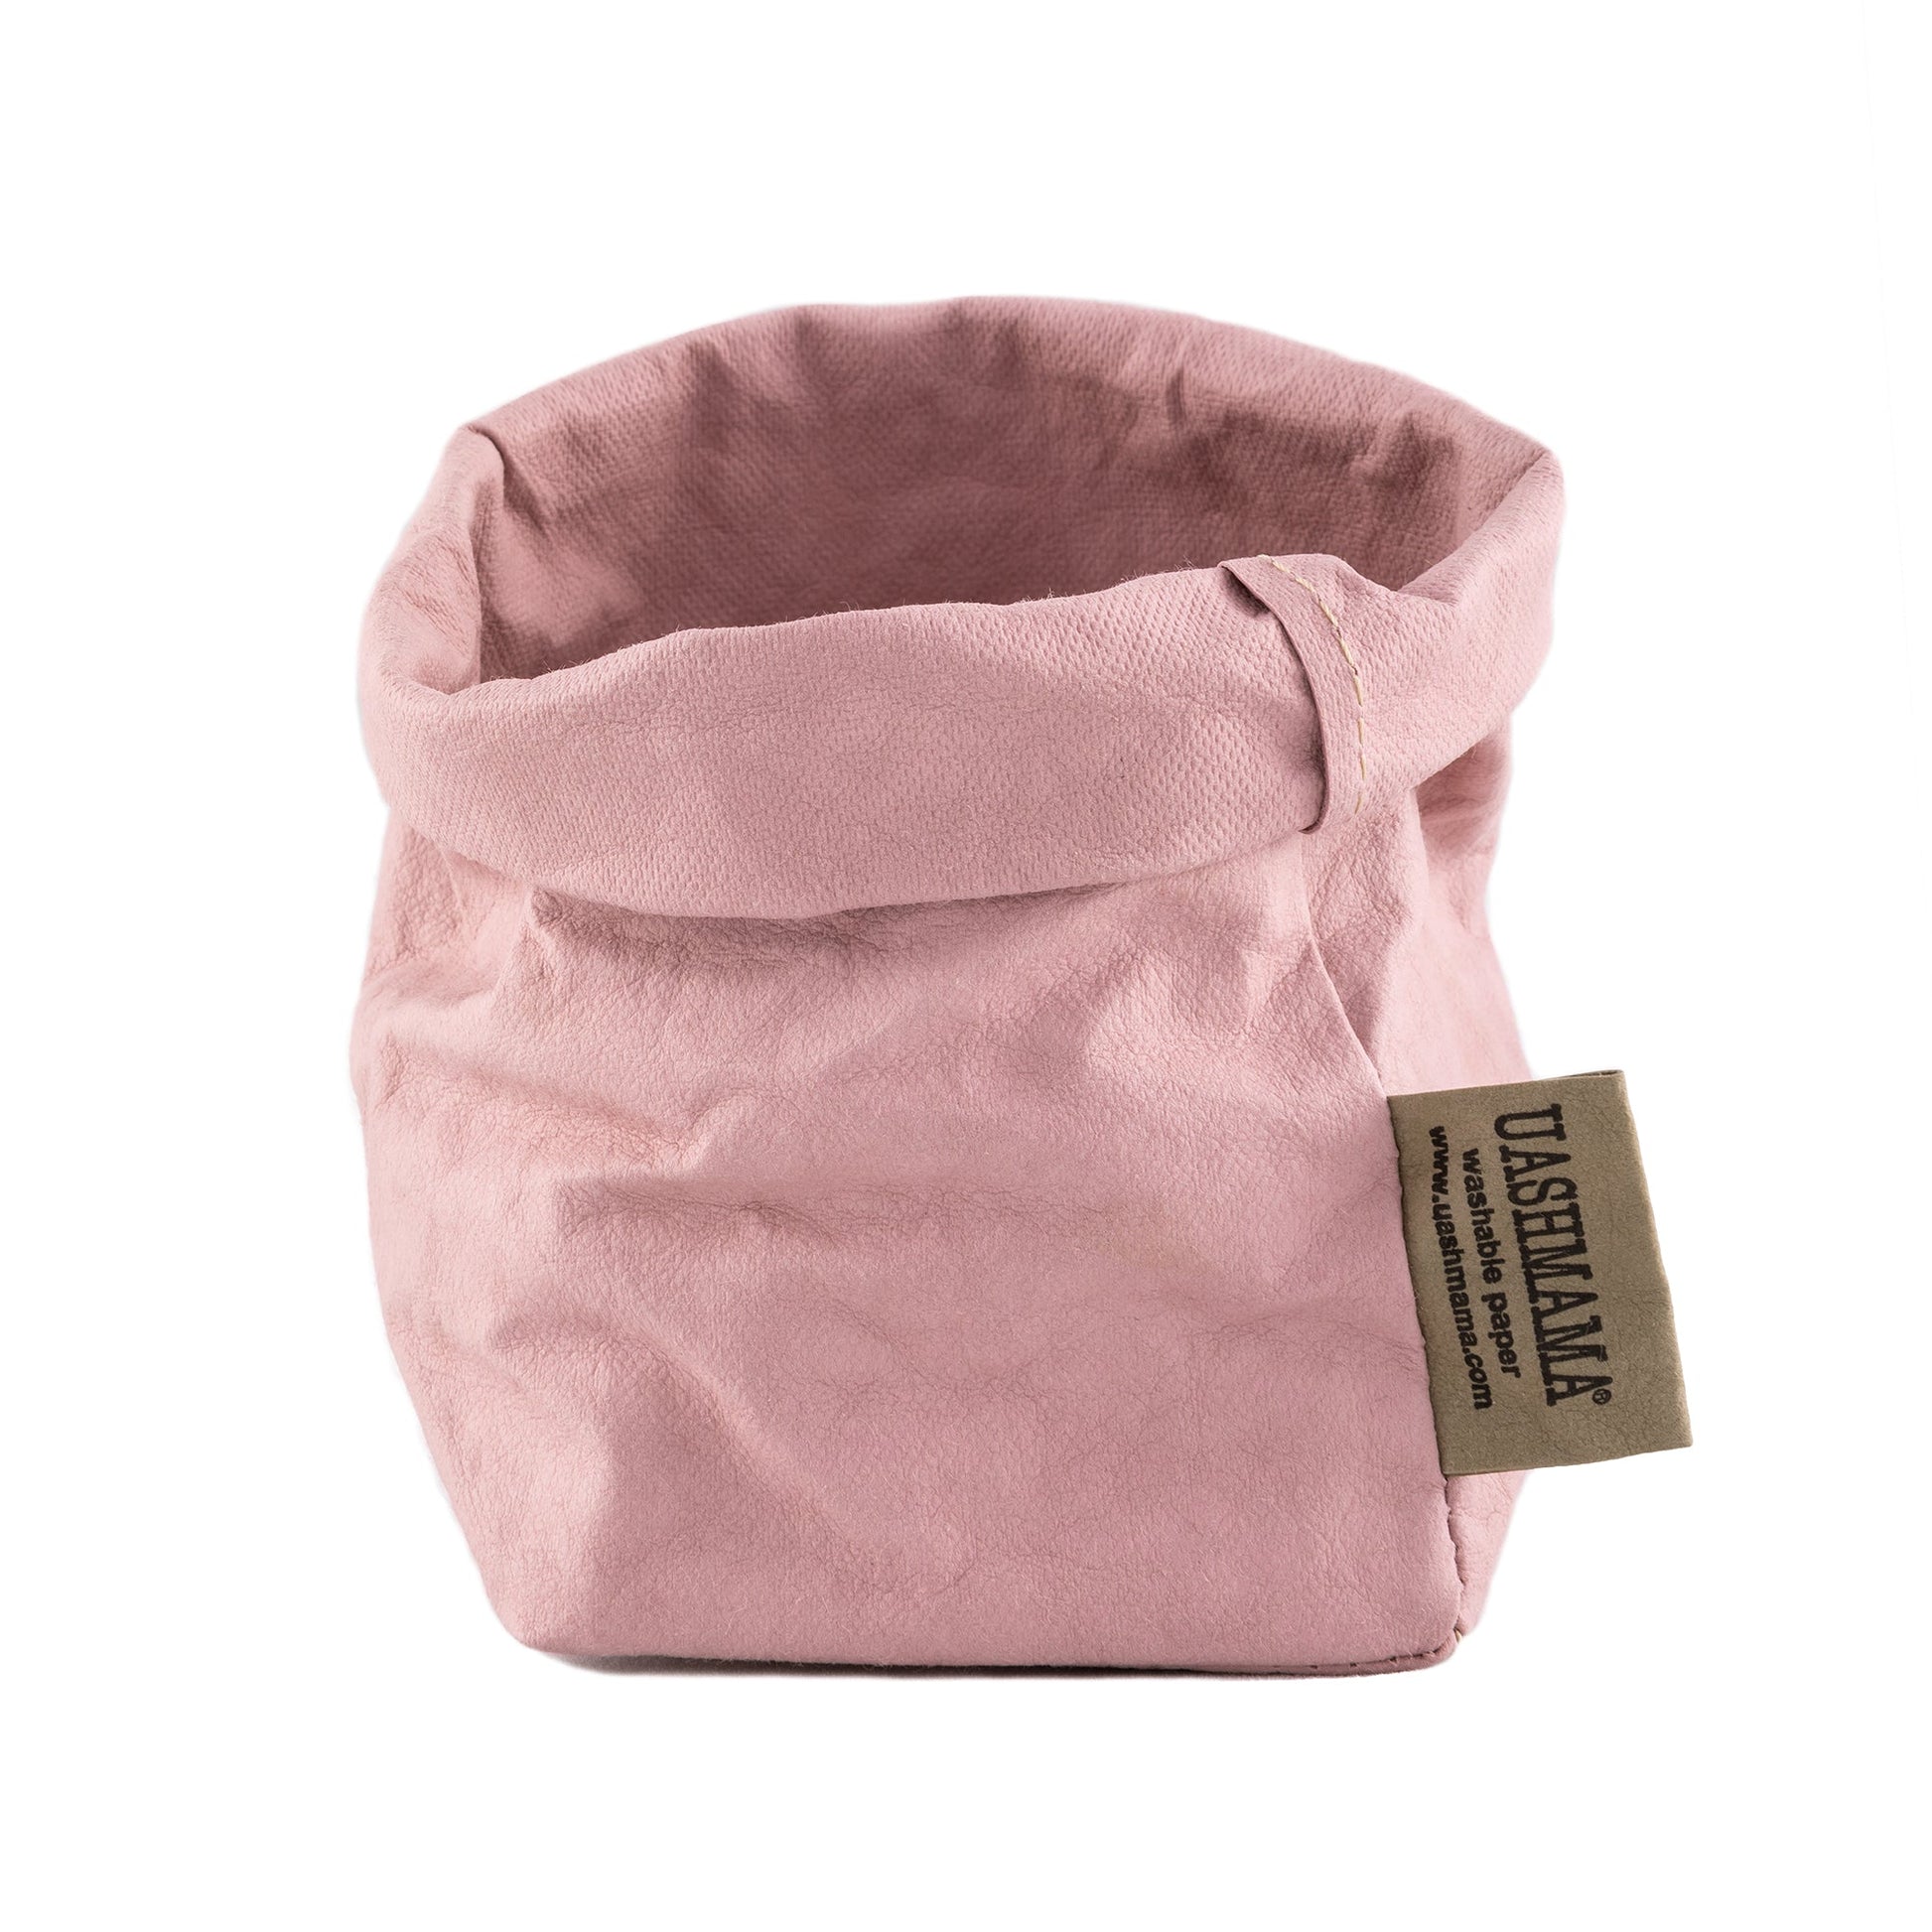 A washable paper bag is shown. The bag is rolled down at the top and features a UASHMAMA logo label on the bottom left corner. The bag pictured is the piccolo size in pale pink.